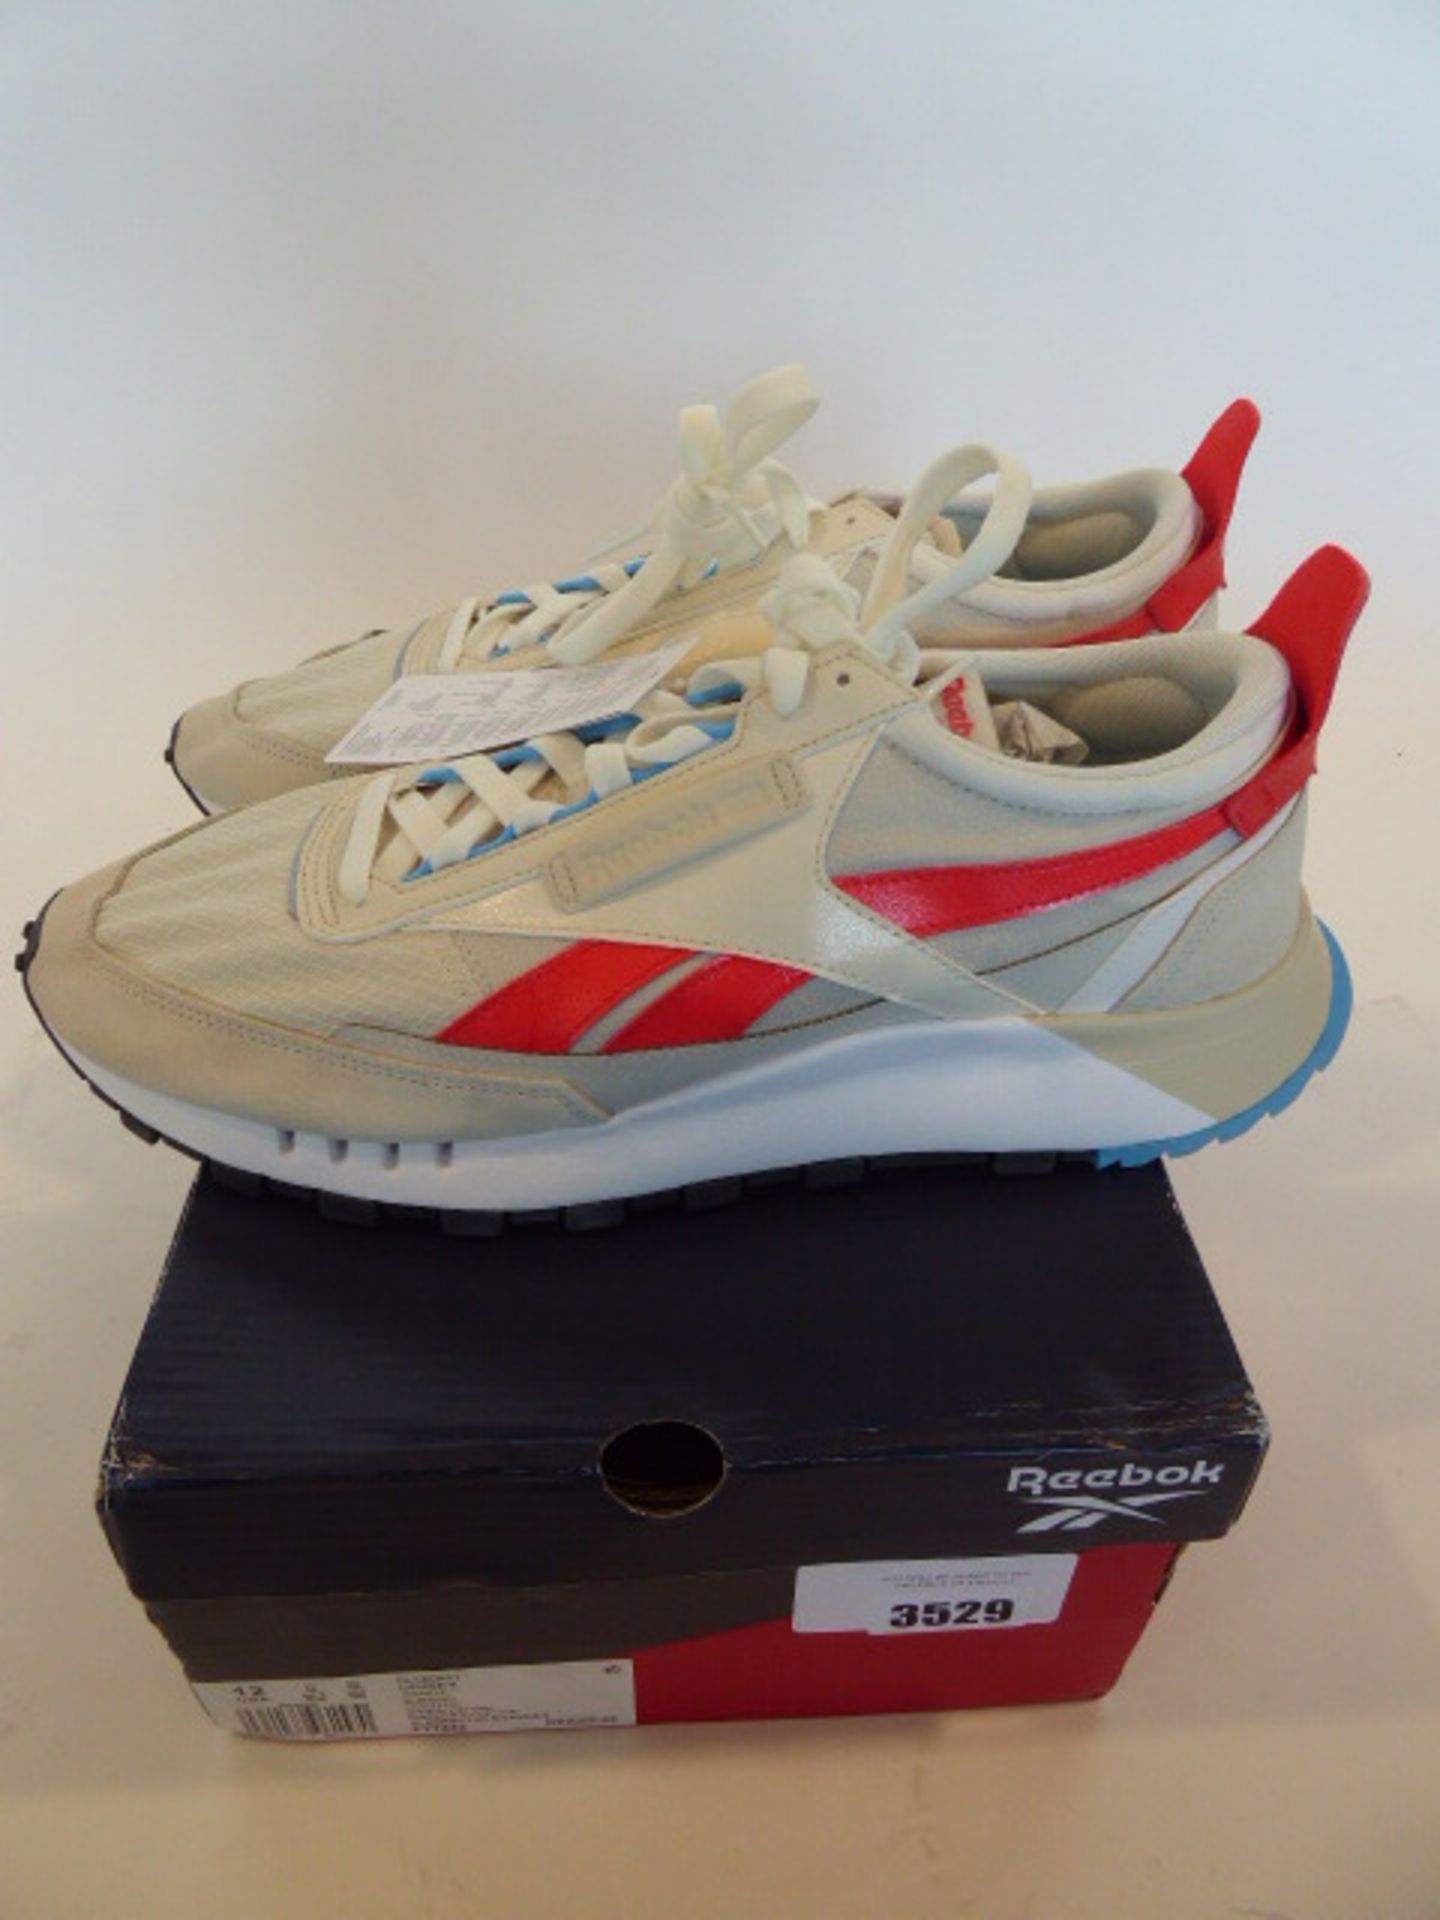 Adidas CL Legacy trainers size 11